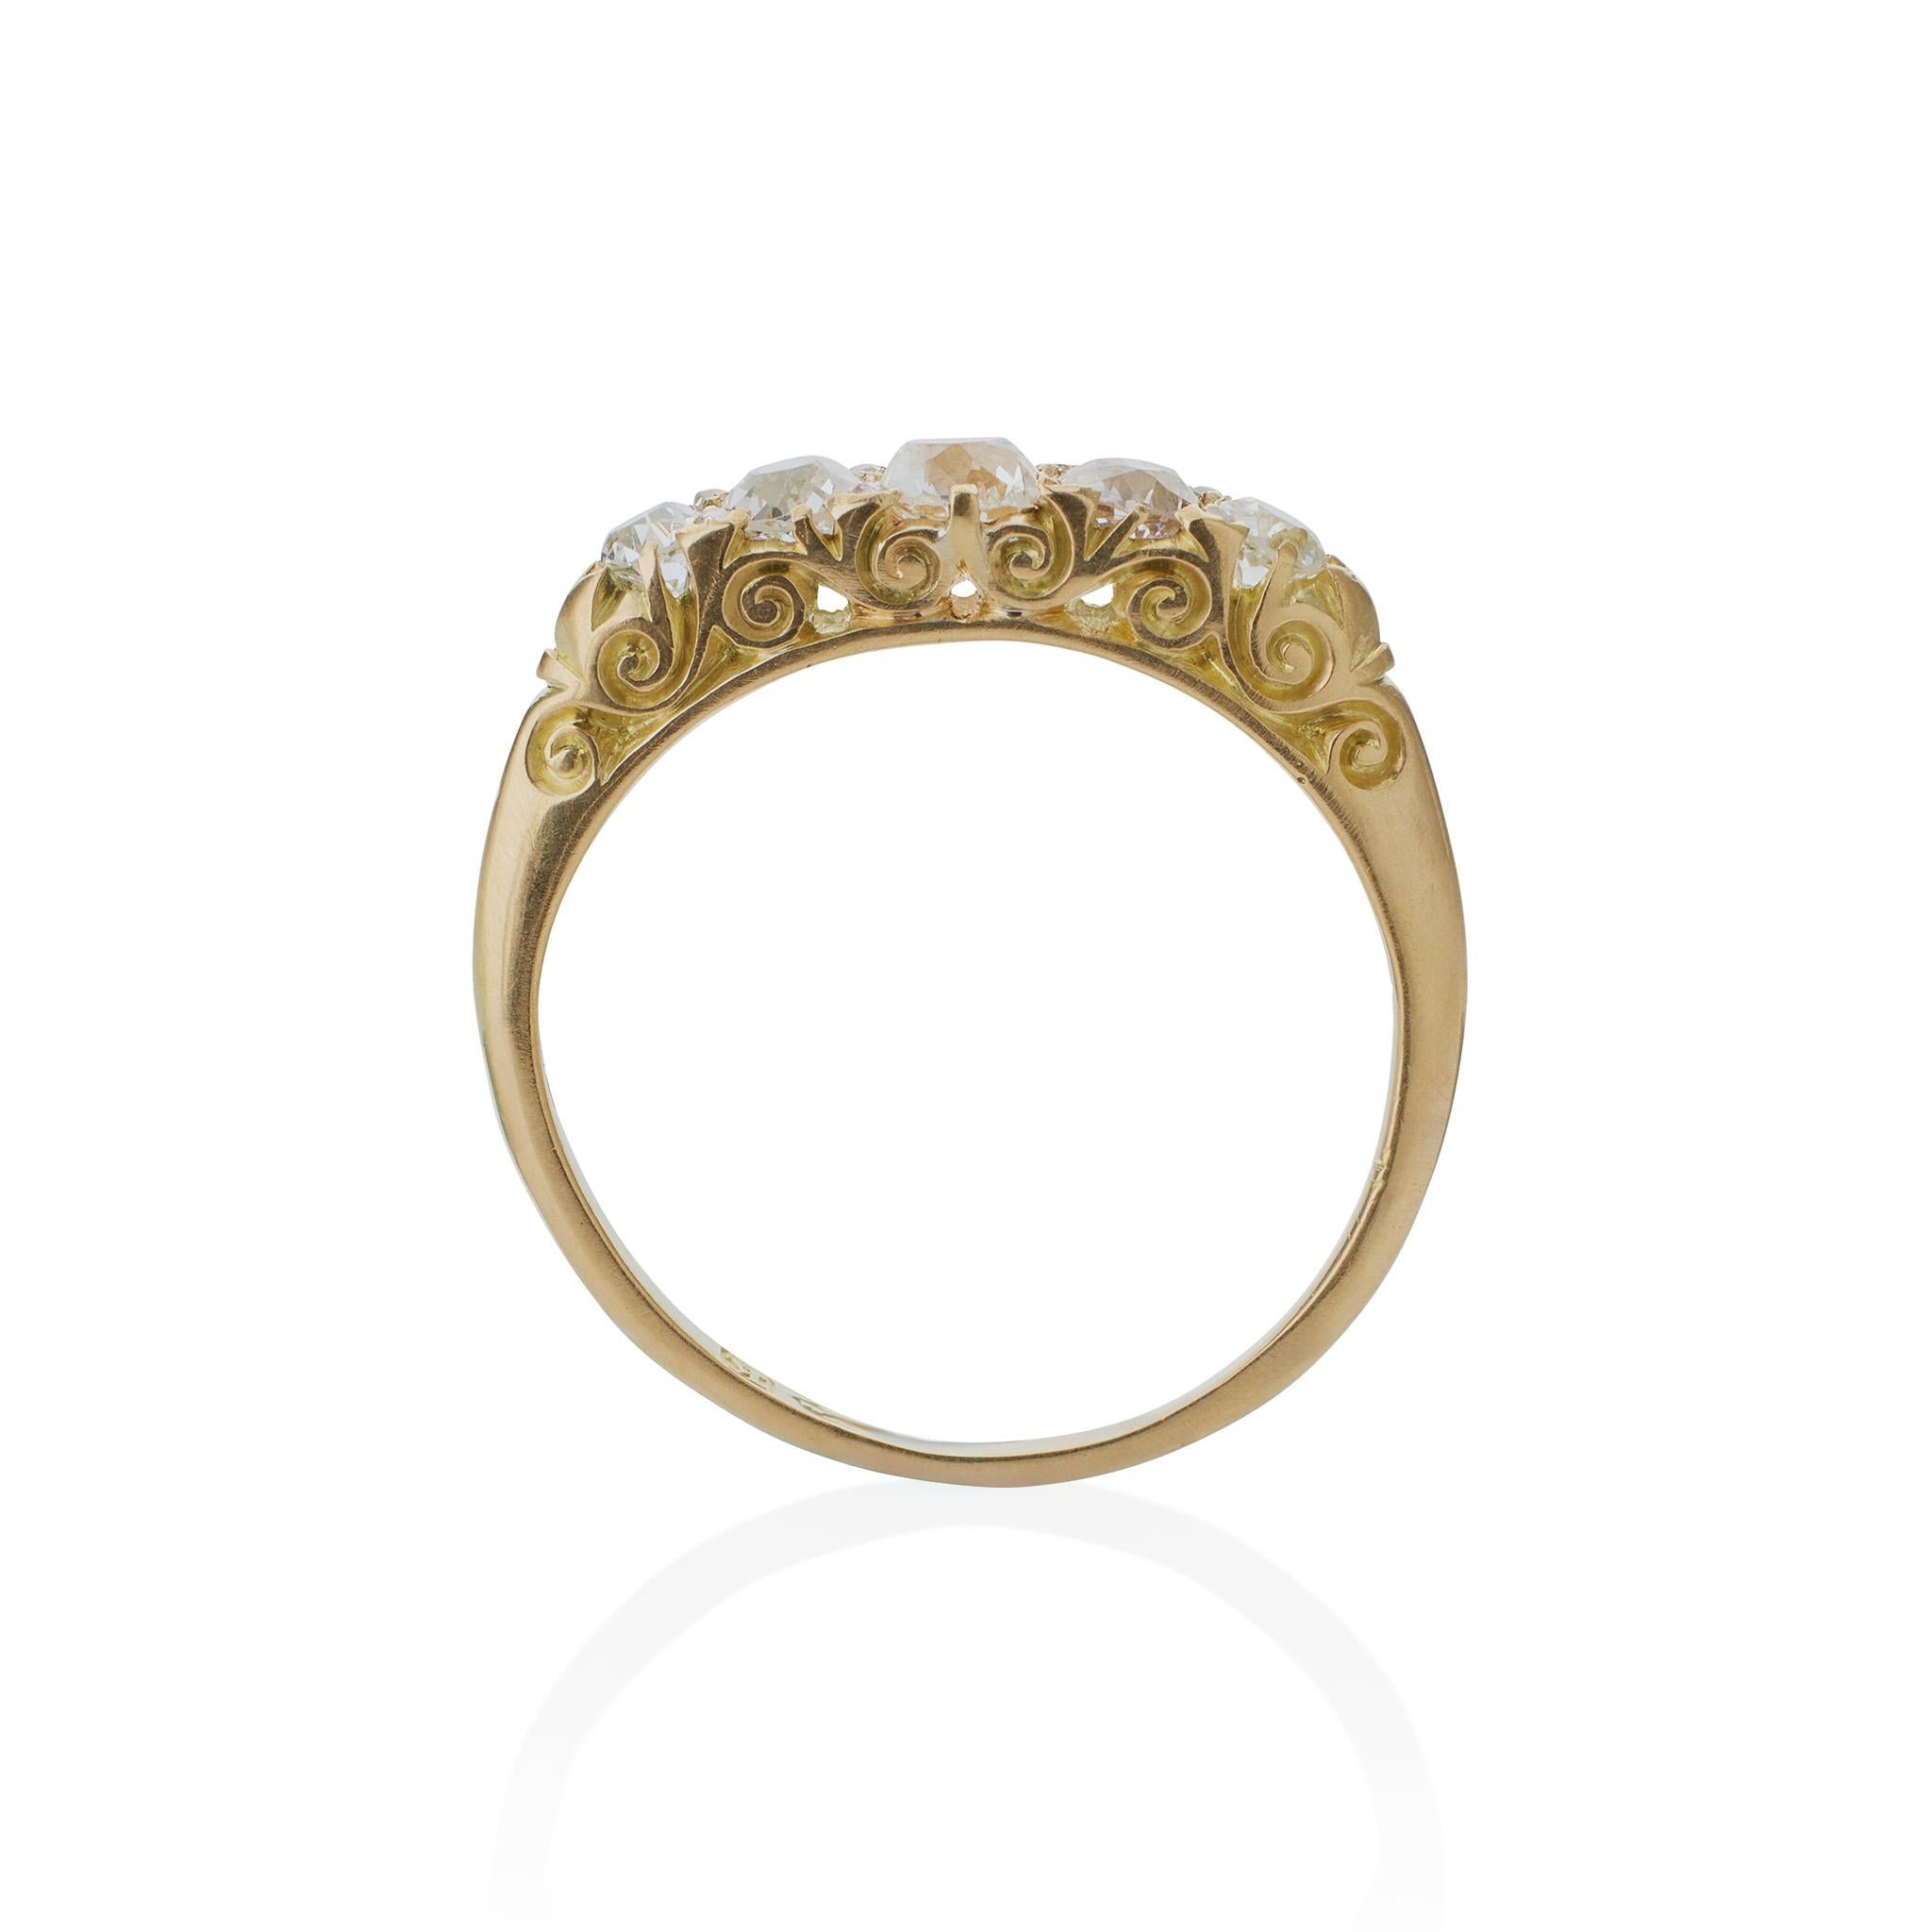 Created in 1893, this antique English diamond ring is set with diamonds mounted in 18K gold, and was made in Chester. The delicate 18K gold band is set across the top with a tapering line of old mine-cut diamonds interspersed with rose-cut diamonds,